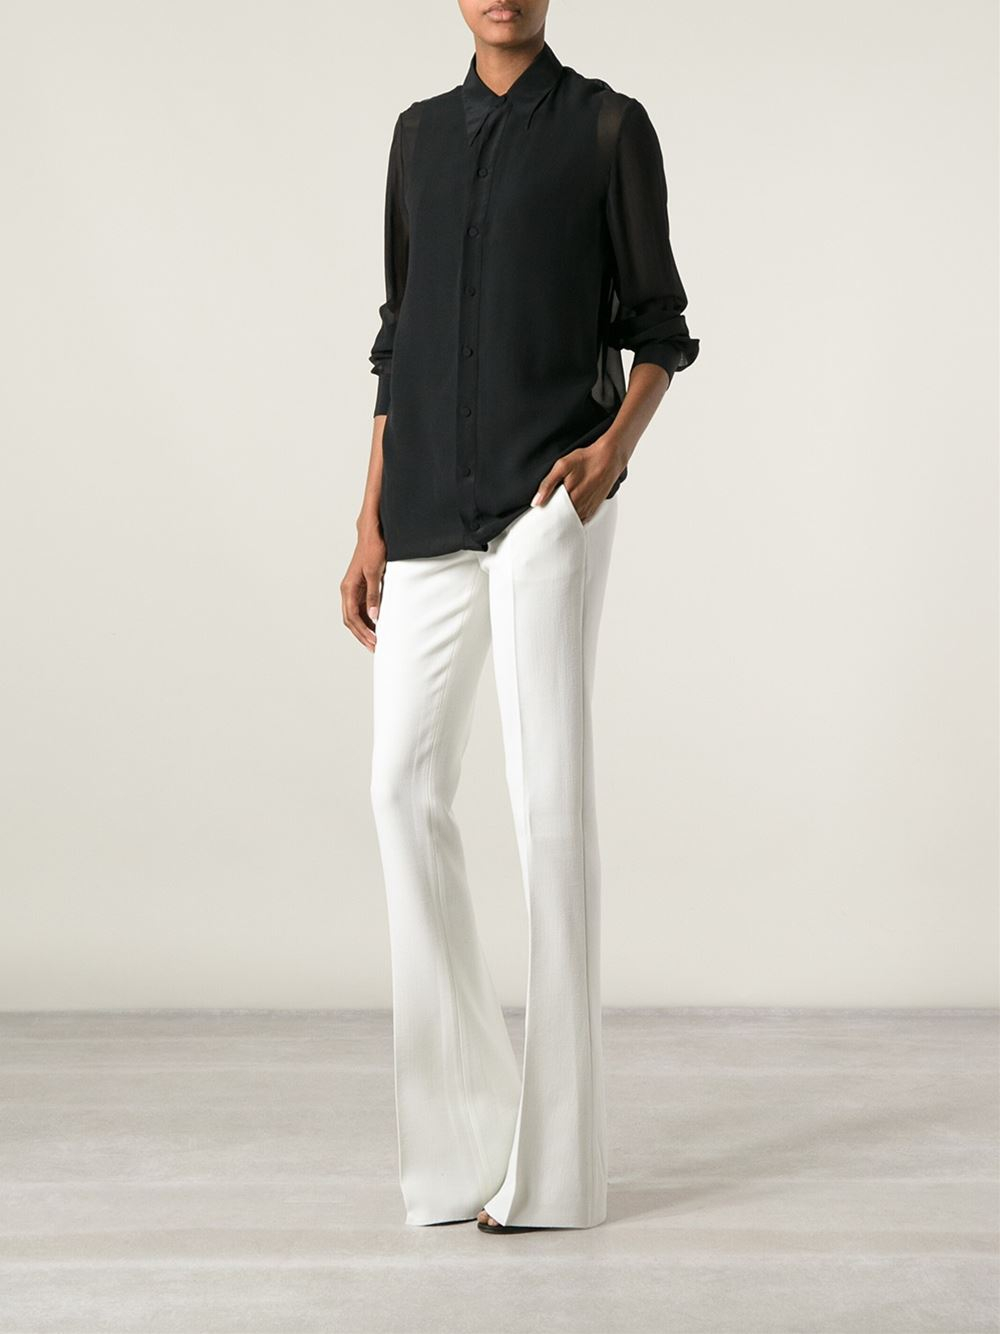 Emilio Pucci Flared Trousers in White - Lyst